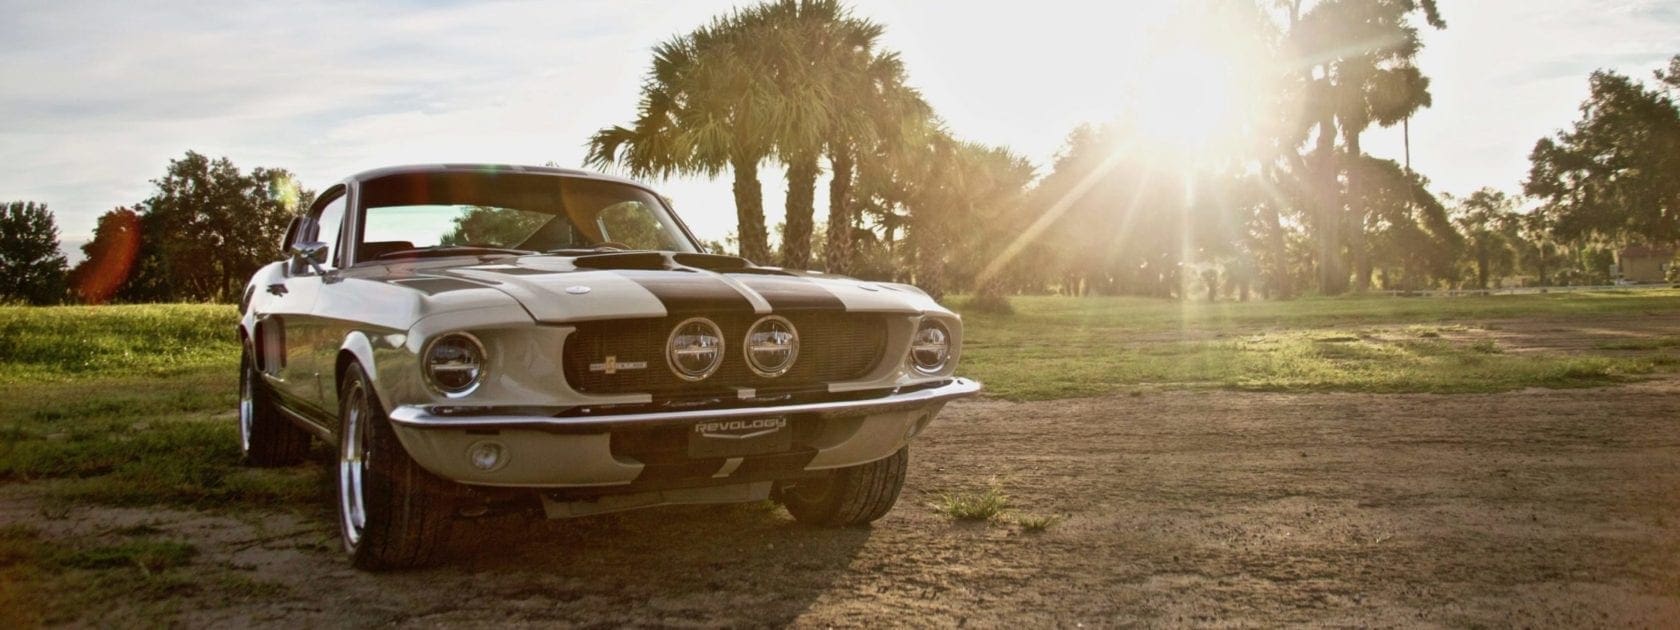 TWELVE COOL CARS WE CAUGHT AT THE AMELIA ISLAND CARS AND COFFEE